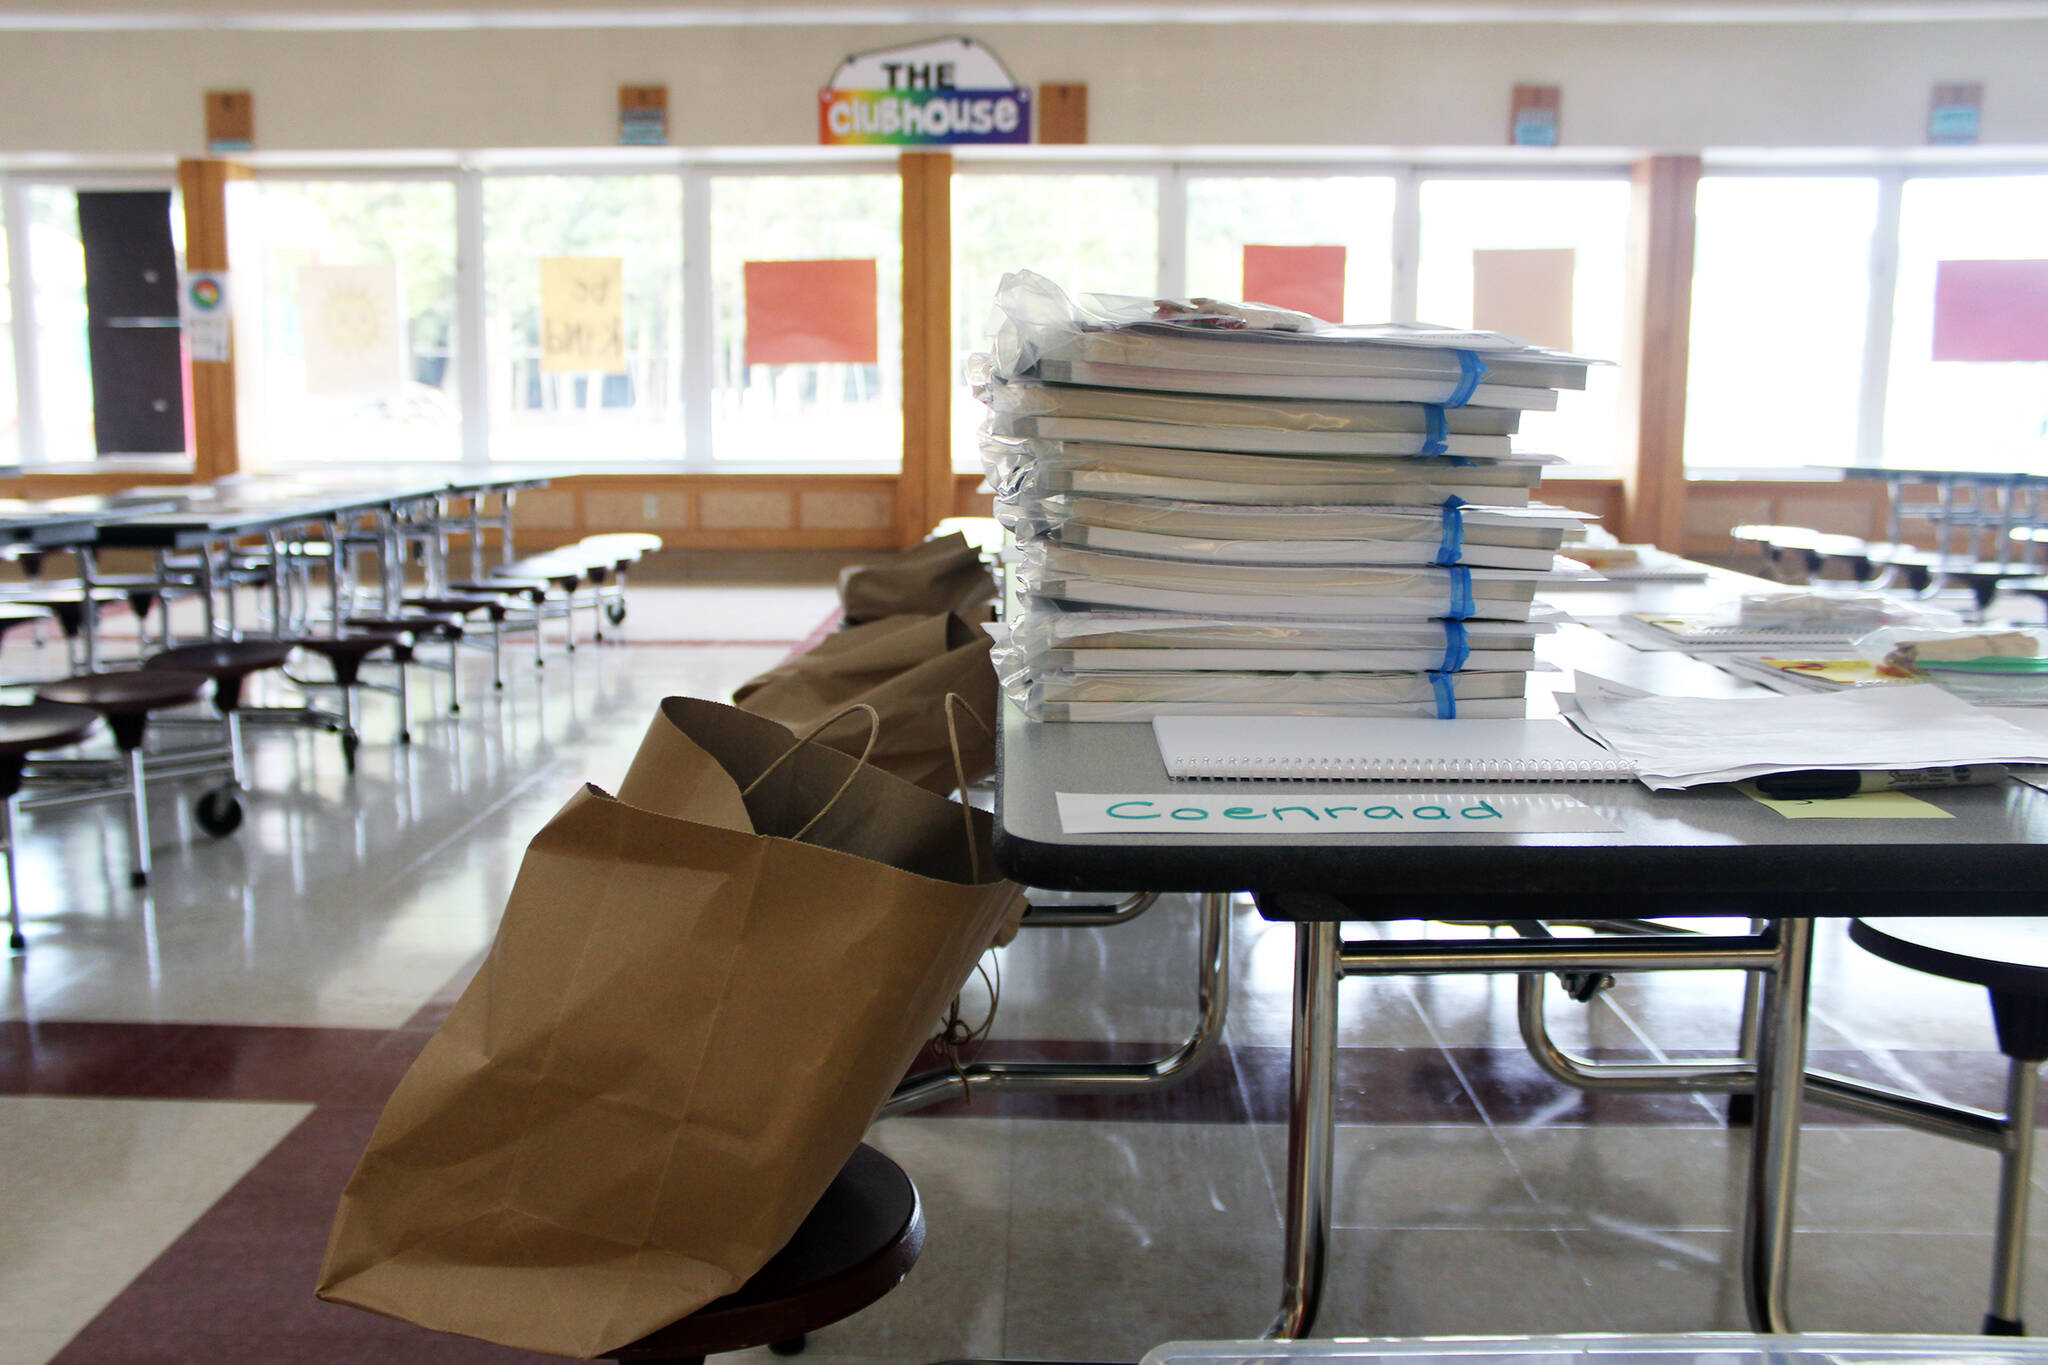 Learning bundles await pickup at what is now known as  Kax̱digoowú Héen Elementary School on Friday, Sept. 4, 2020. The school's name was officially changedTuesday night after much debate. It was previously named Riverbend Elementary School. (Ben Hohenstatt / Juneau Empire File)